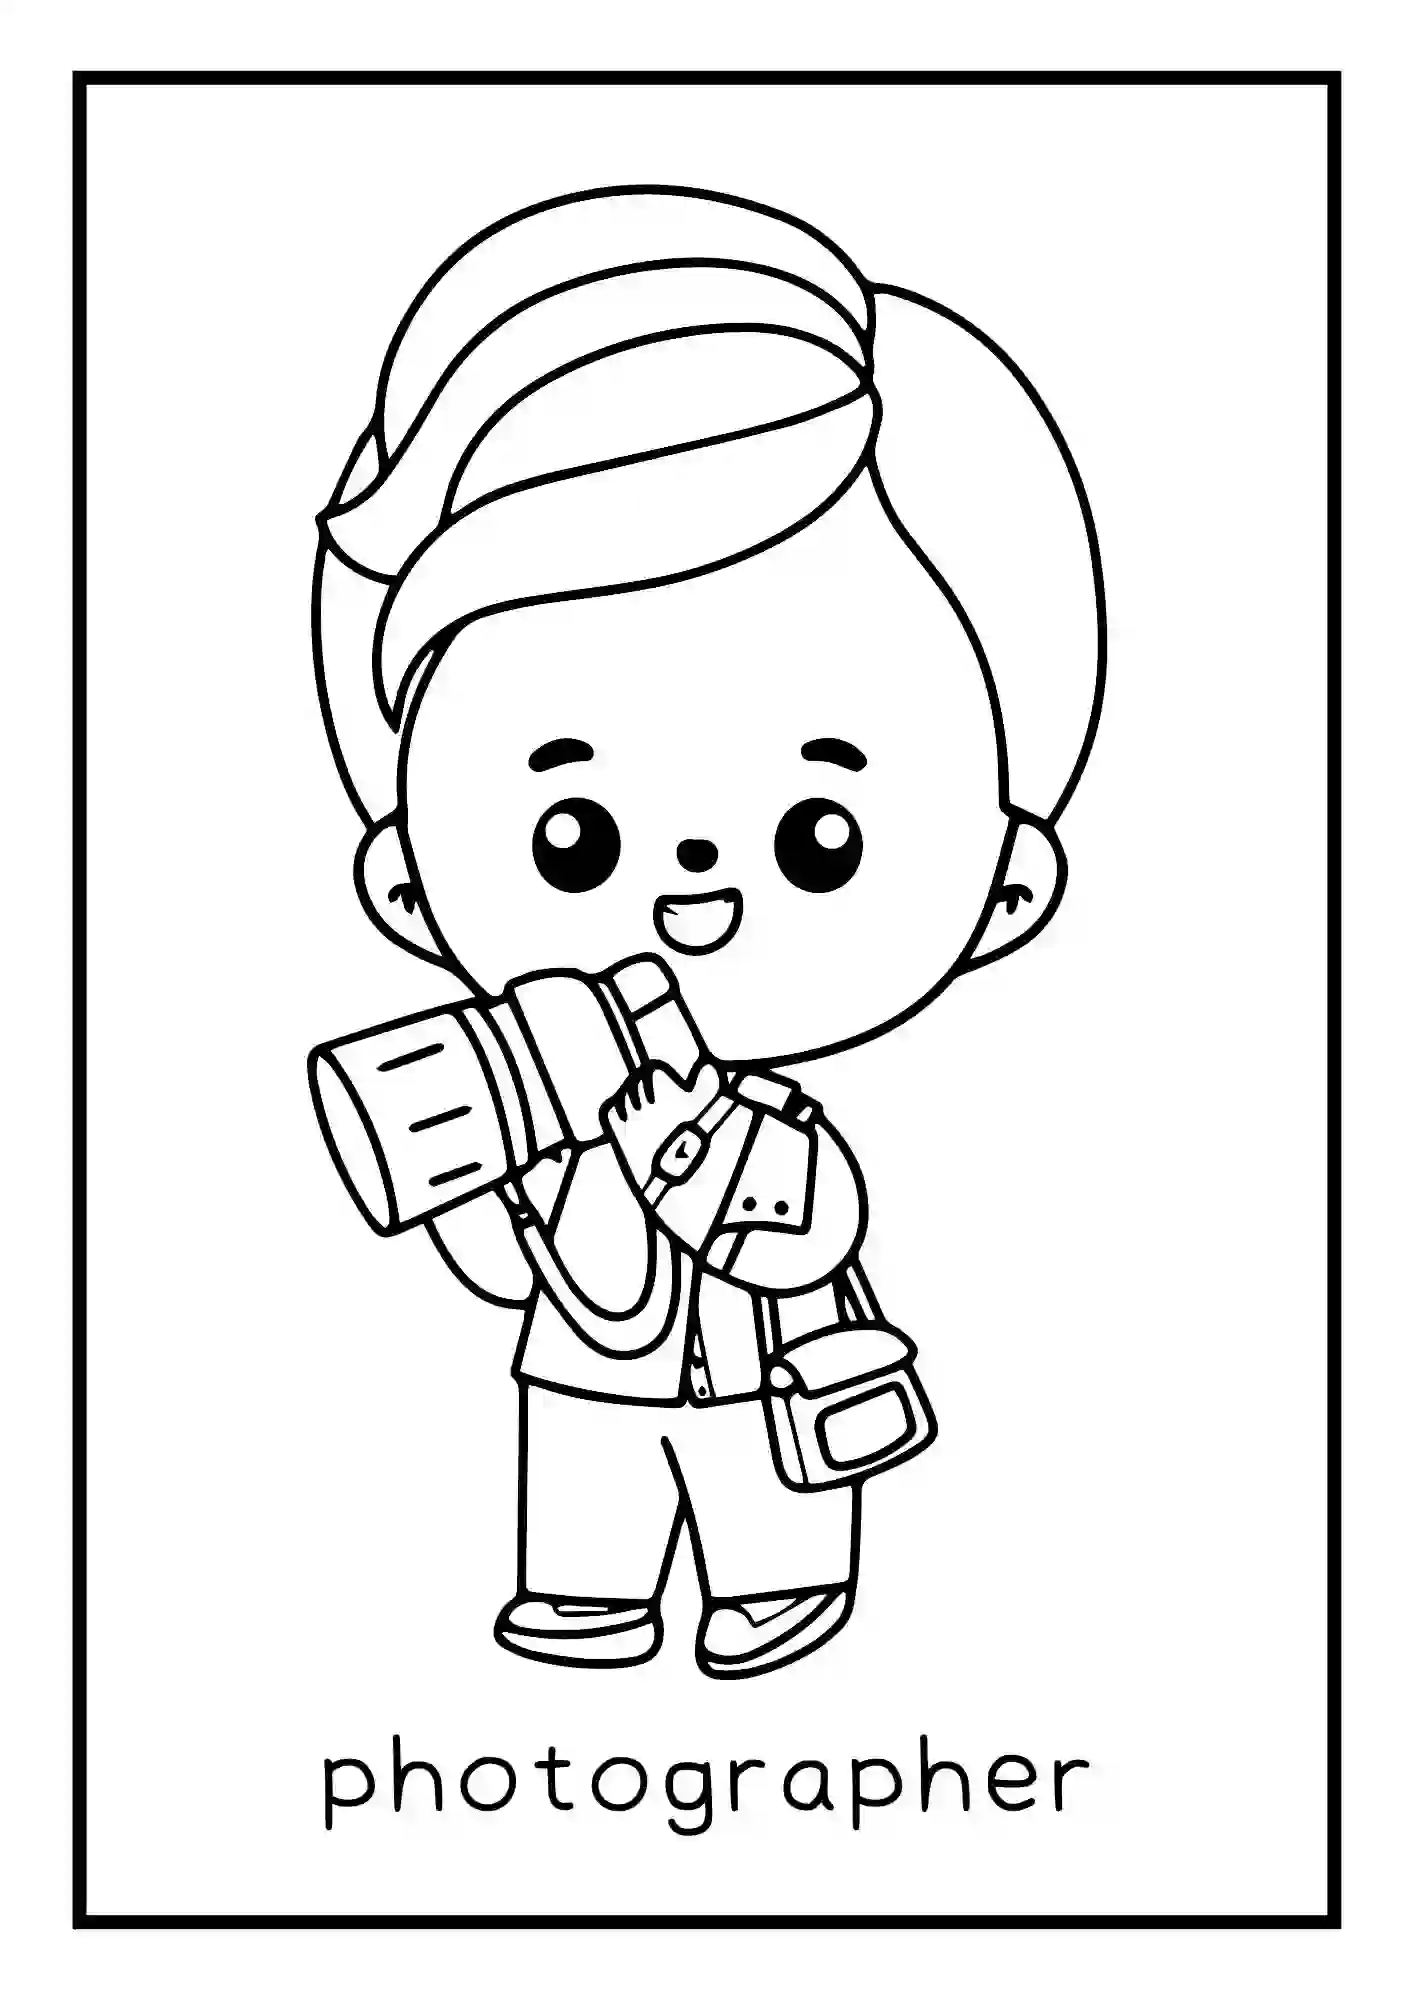 Different Professions, occupations, carriers, jobs, Coloring Worksheets (photographer)